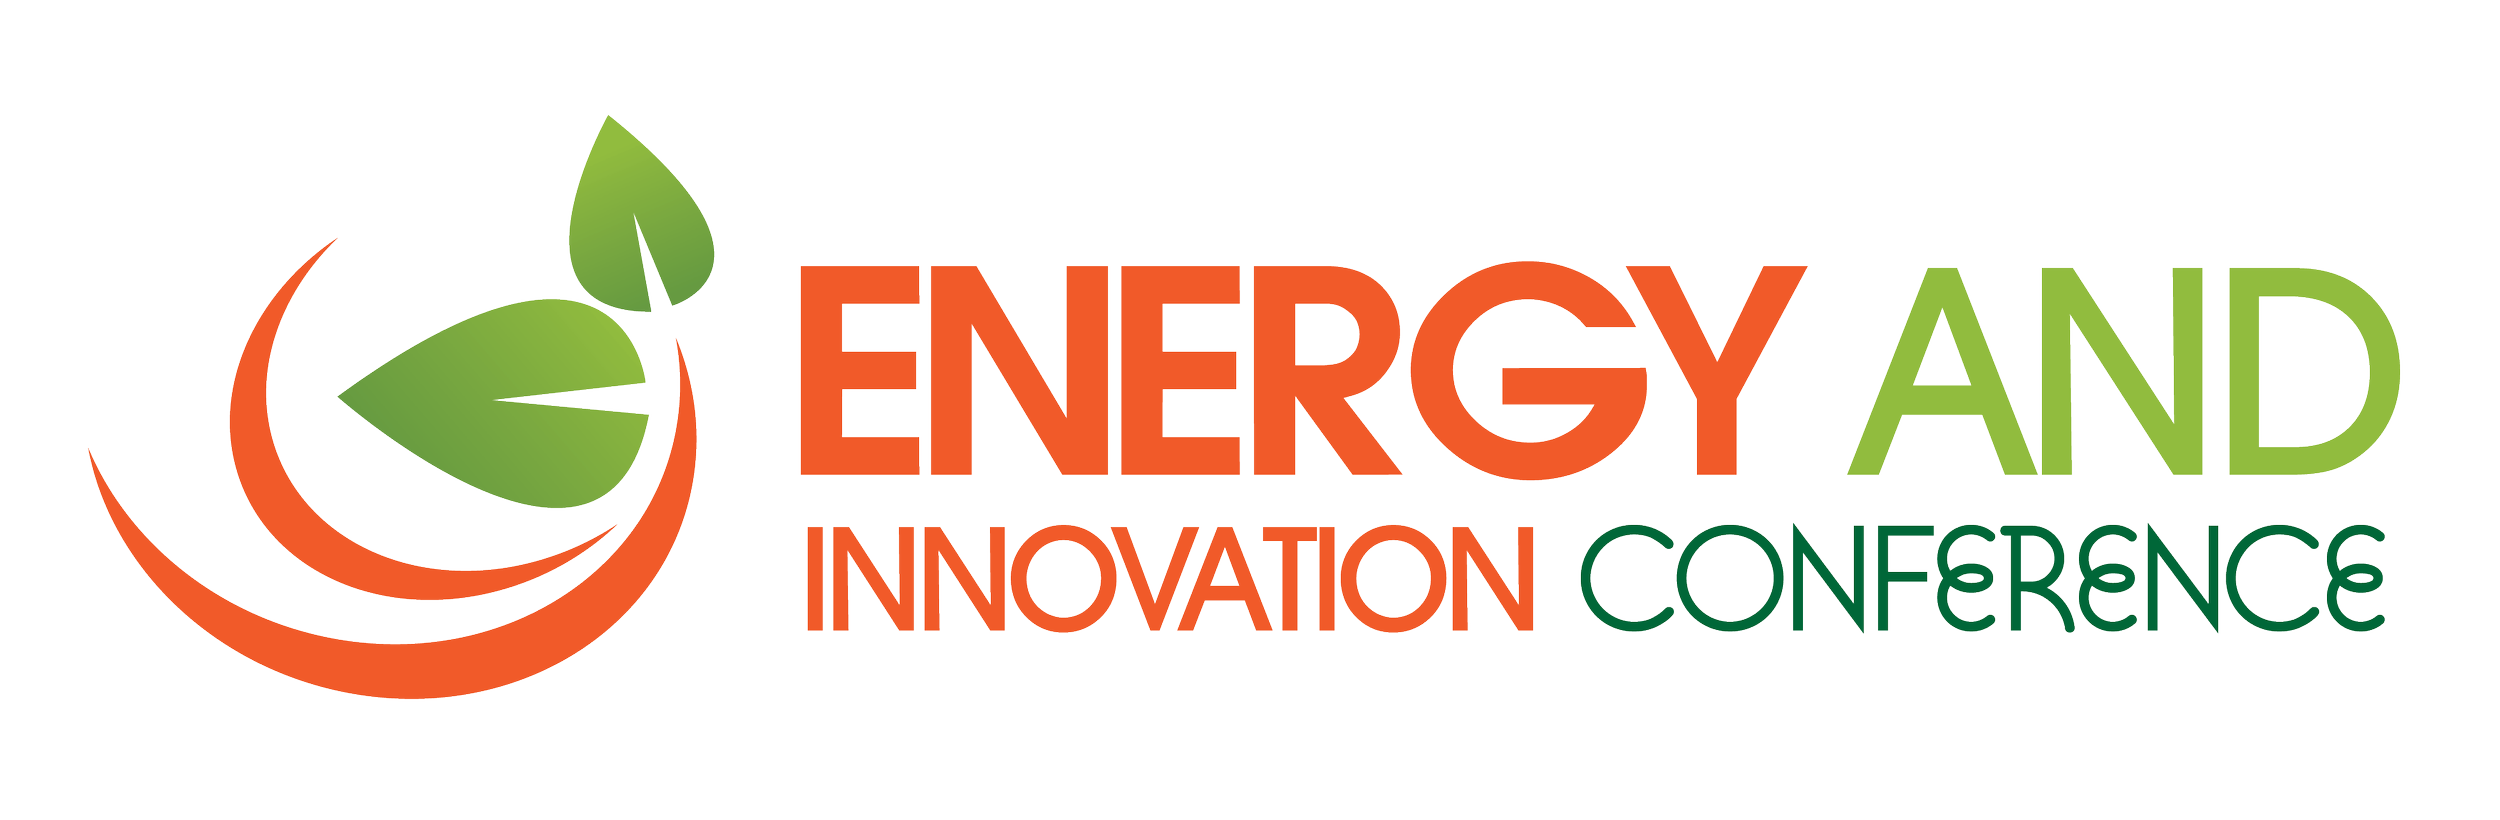 Energy and Innovation Conference logo NoLG_COL.png